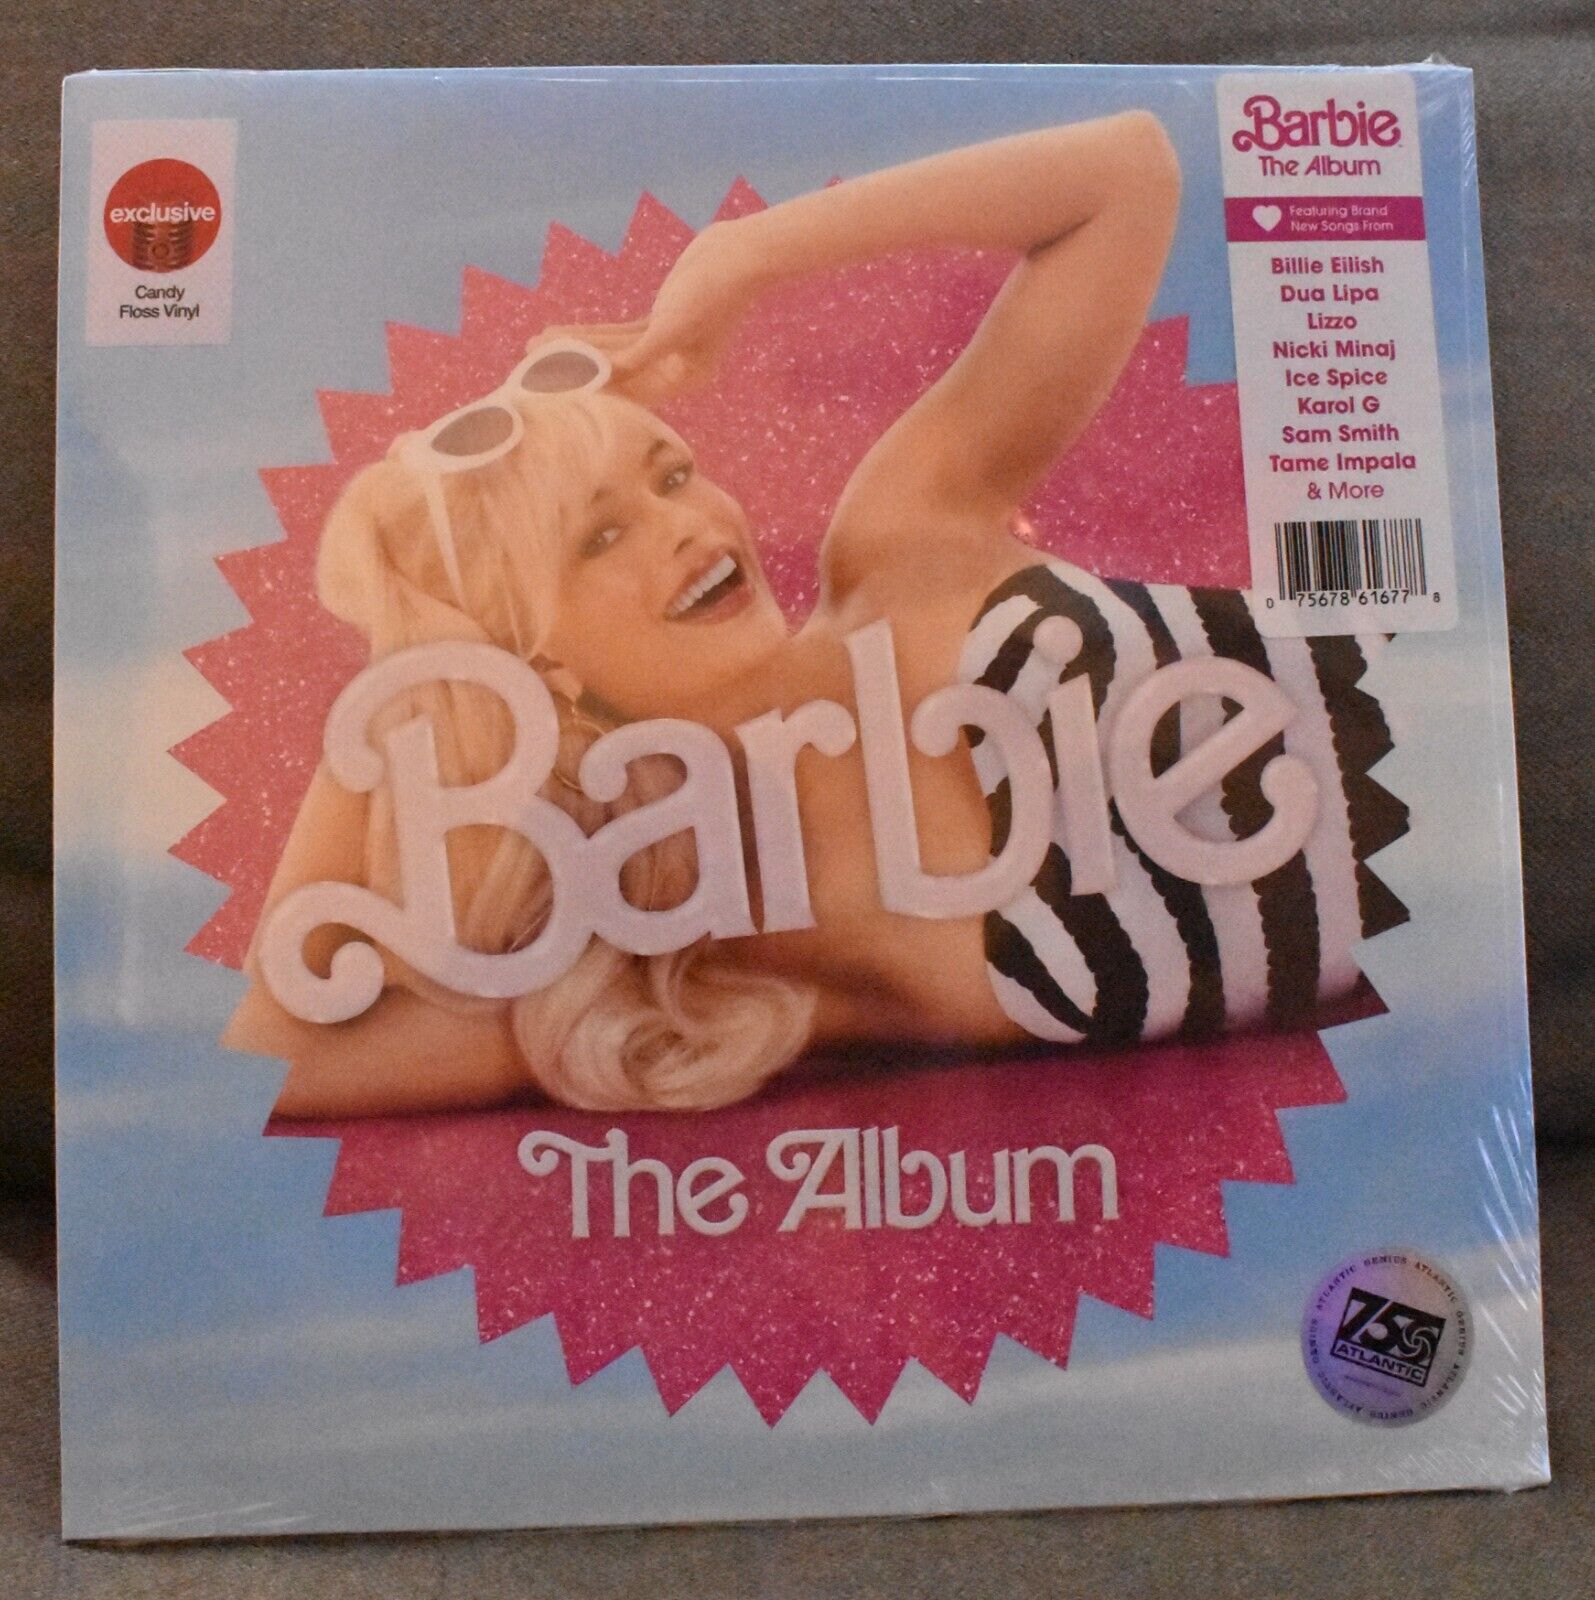 BARBIE THE MOVIE - TARGET EXCLUSIVE CANDY FLOSS PINK VINYL - BRAND NEW SEALED 